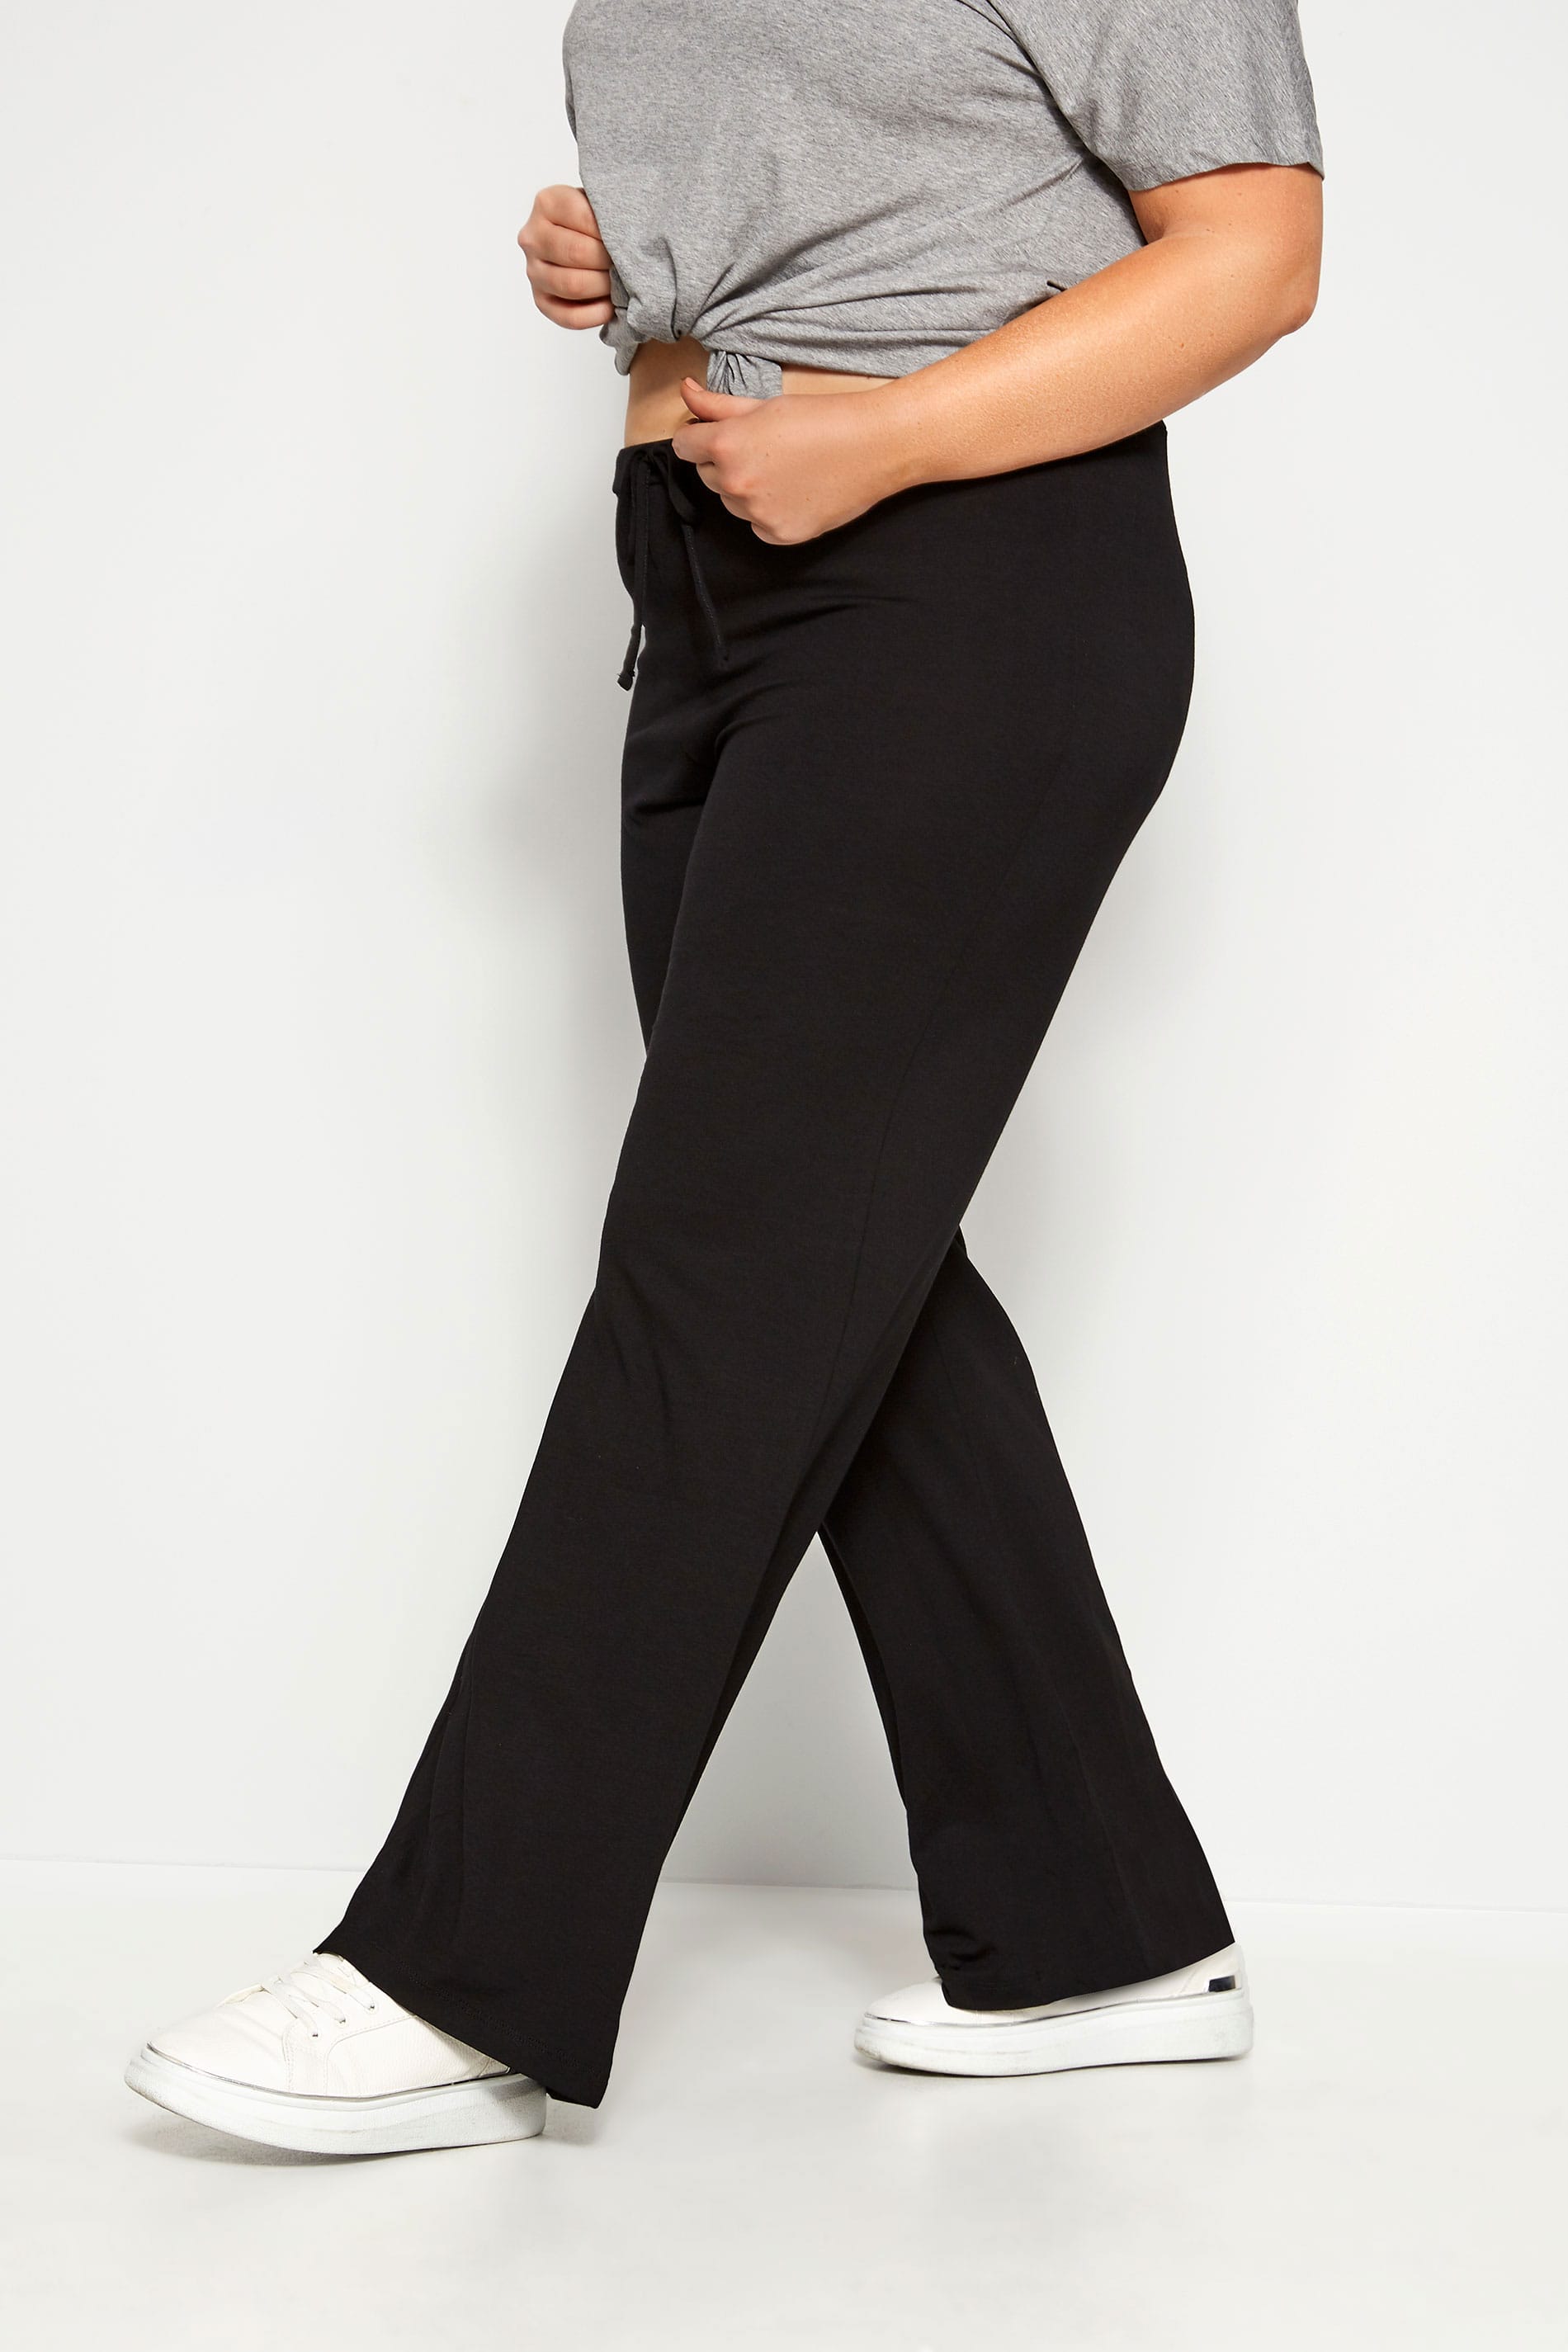 Navy Wide Leg Pull On Stretch Jersey Yoga Trousers Plus 